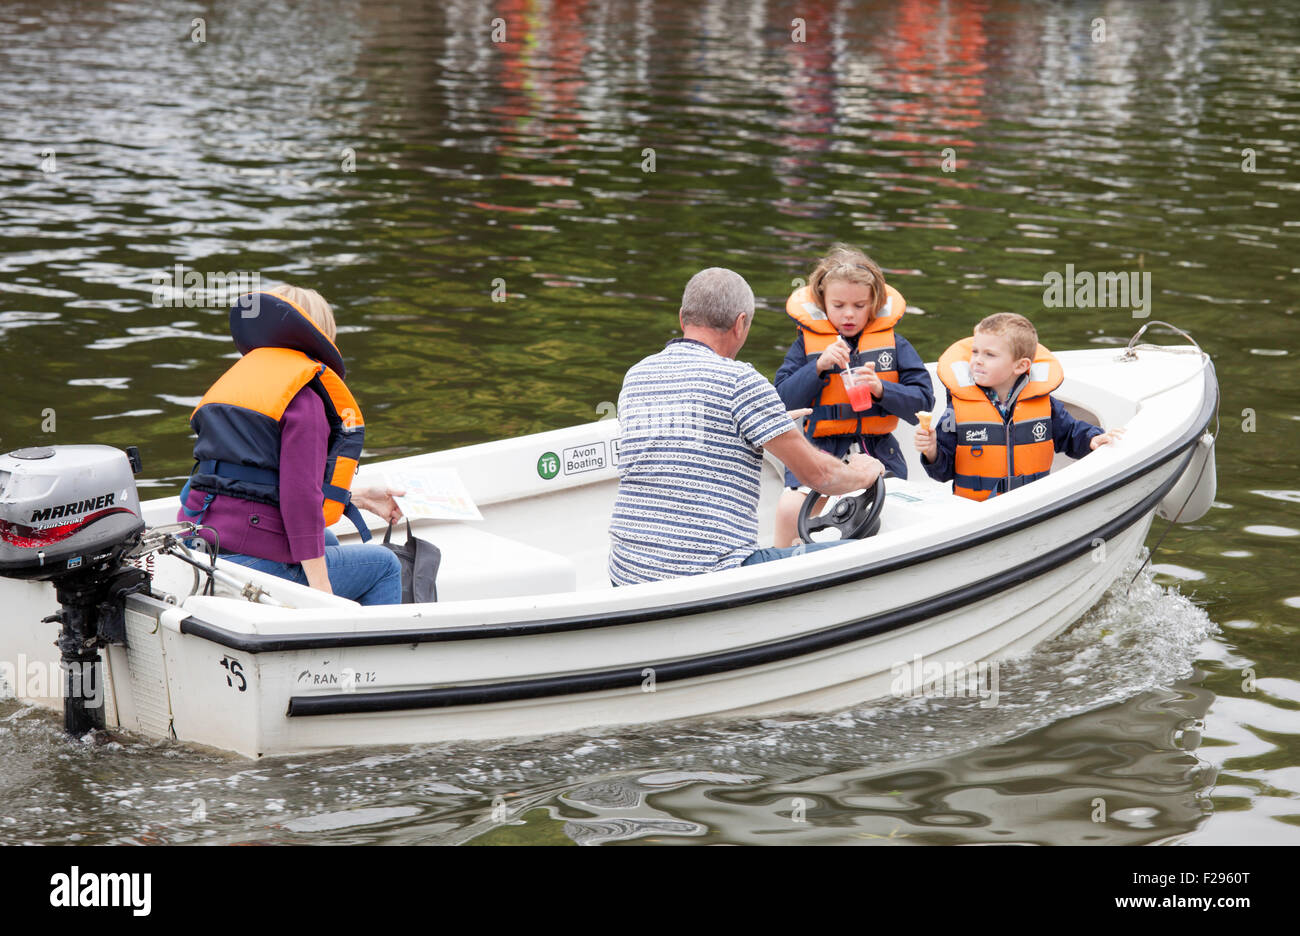 Family in a hired motorboat all wearing life jackets except the male, on the River Avon, Warwickshire, England, UK Stock Photo